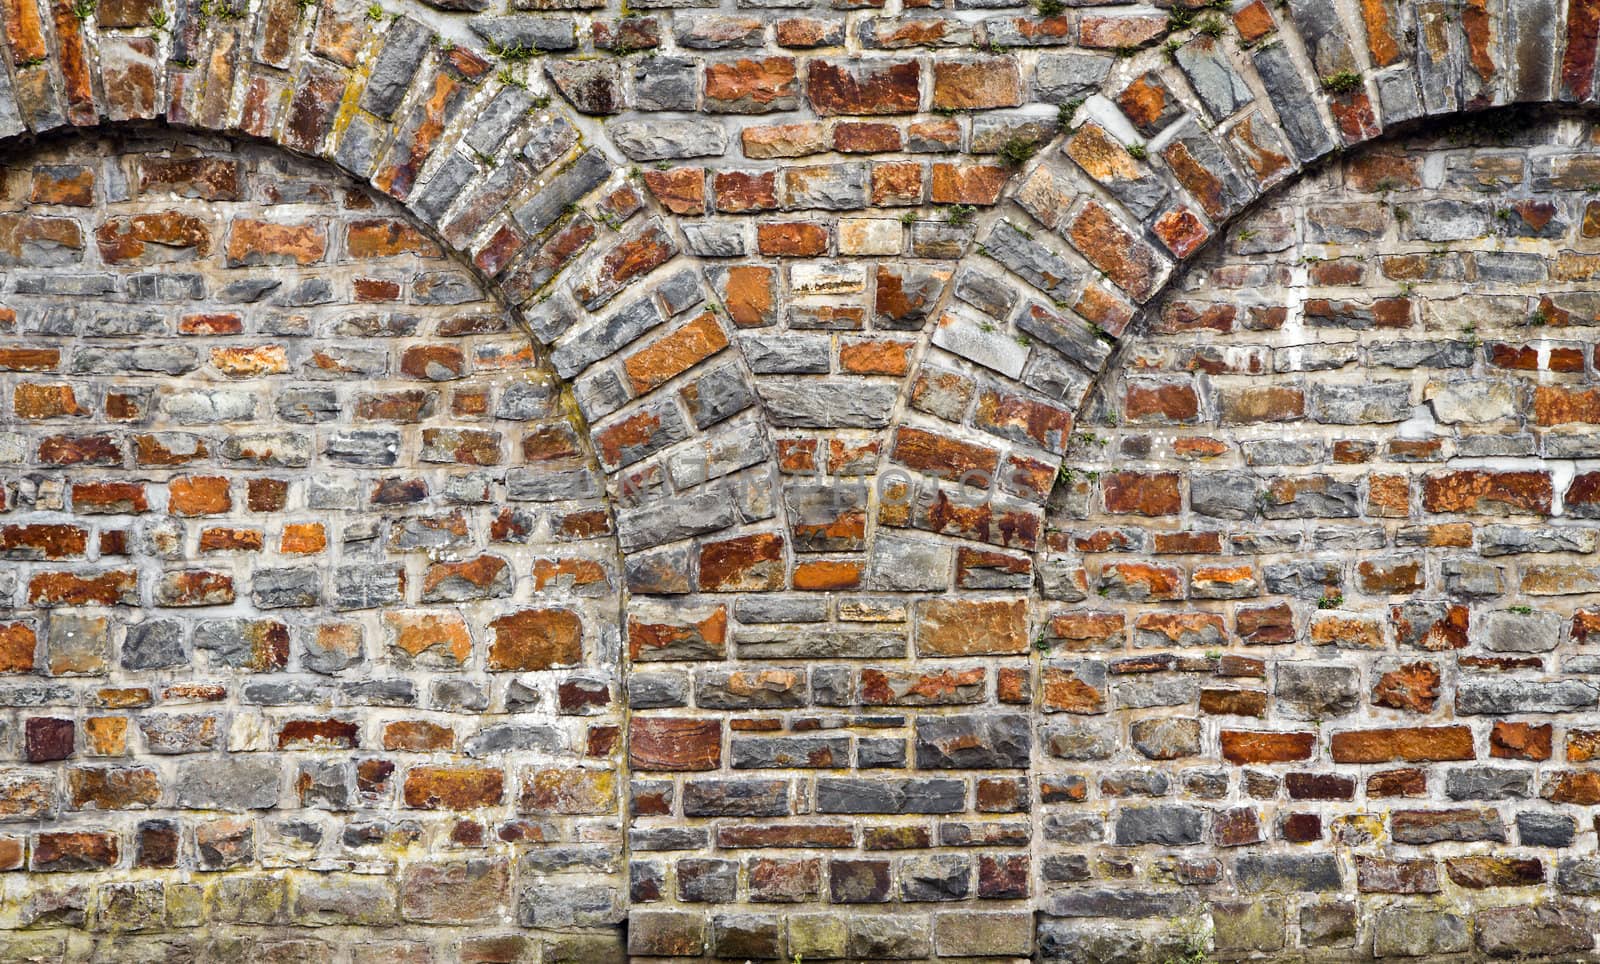 Cut out rocks in wall with arched brickwork by Colette